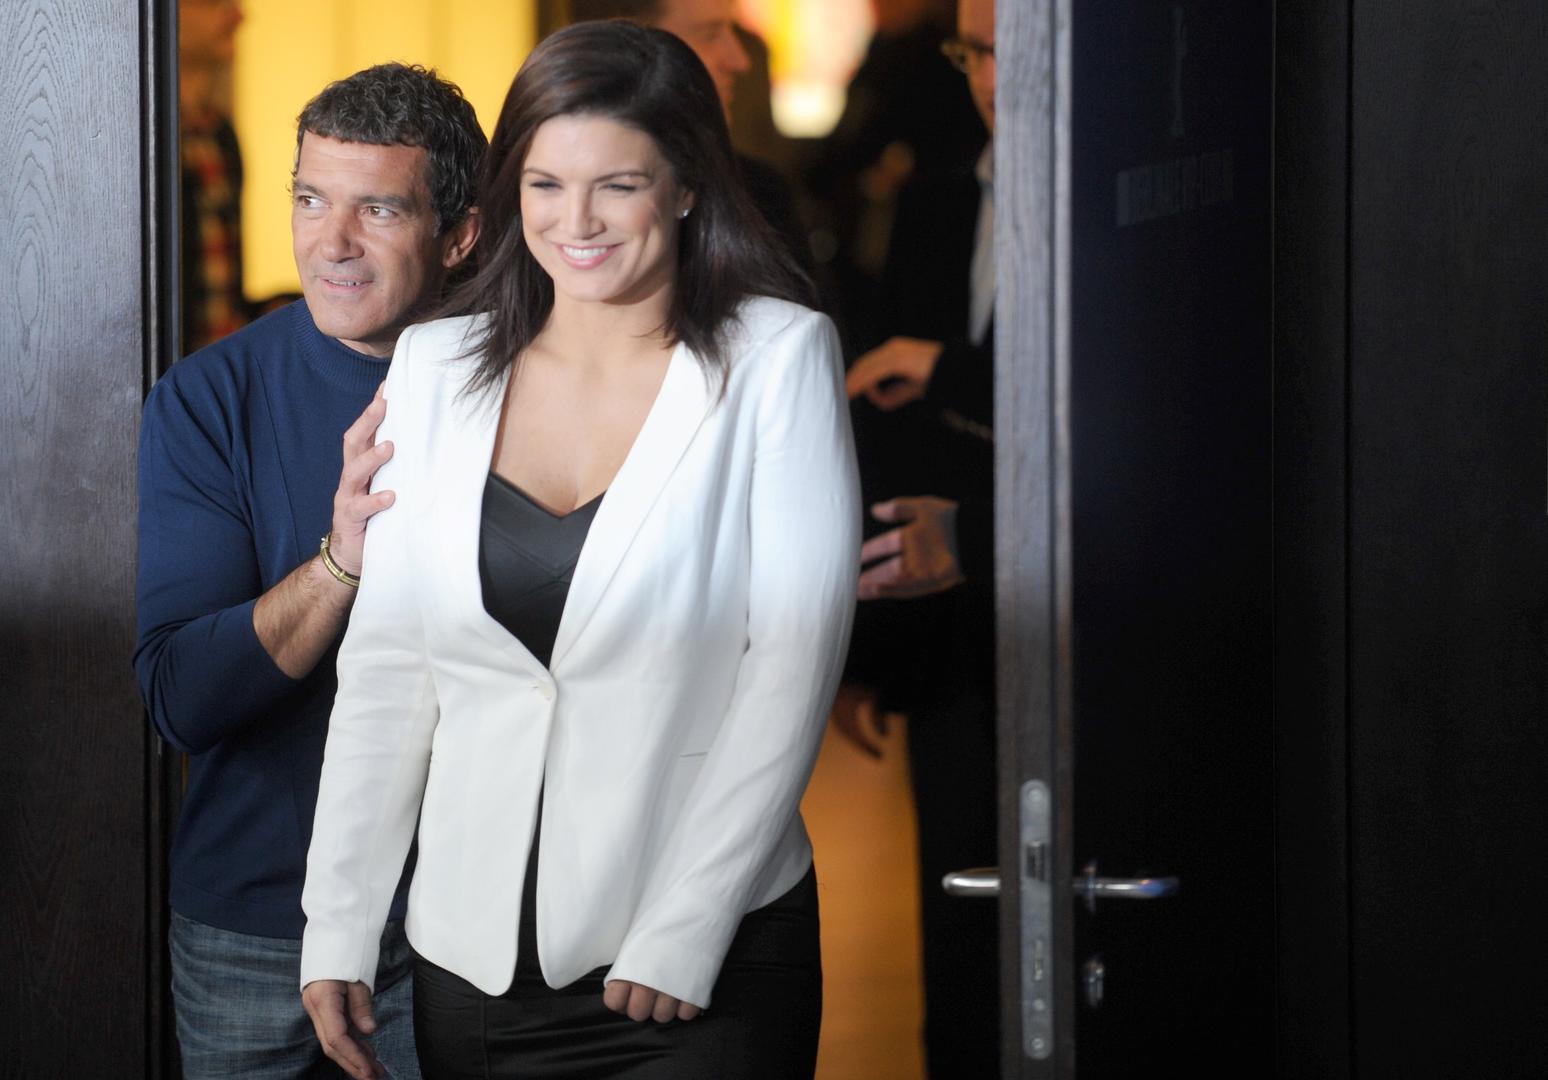 US actress Gina Carano arrives with Spanish actor Antonio Banderas for the photocall of the movie 'Haywire' during the 62nd Berlin International Film Festival, in Berlin, Germany, 15 February 2012. The movie is presented in the section Competition Special Screening at the 62nd Berlinale running from 09 to 19 February. Photo: Joerg Carstensen/DPA/PIXSELL